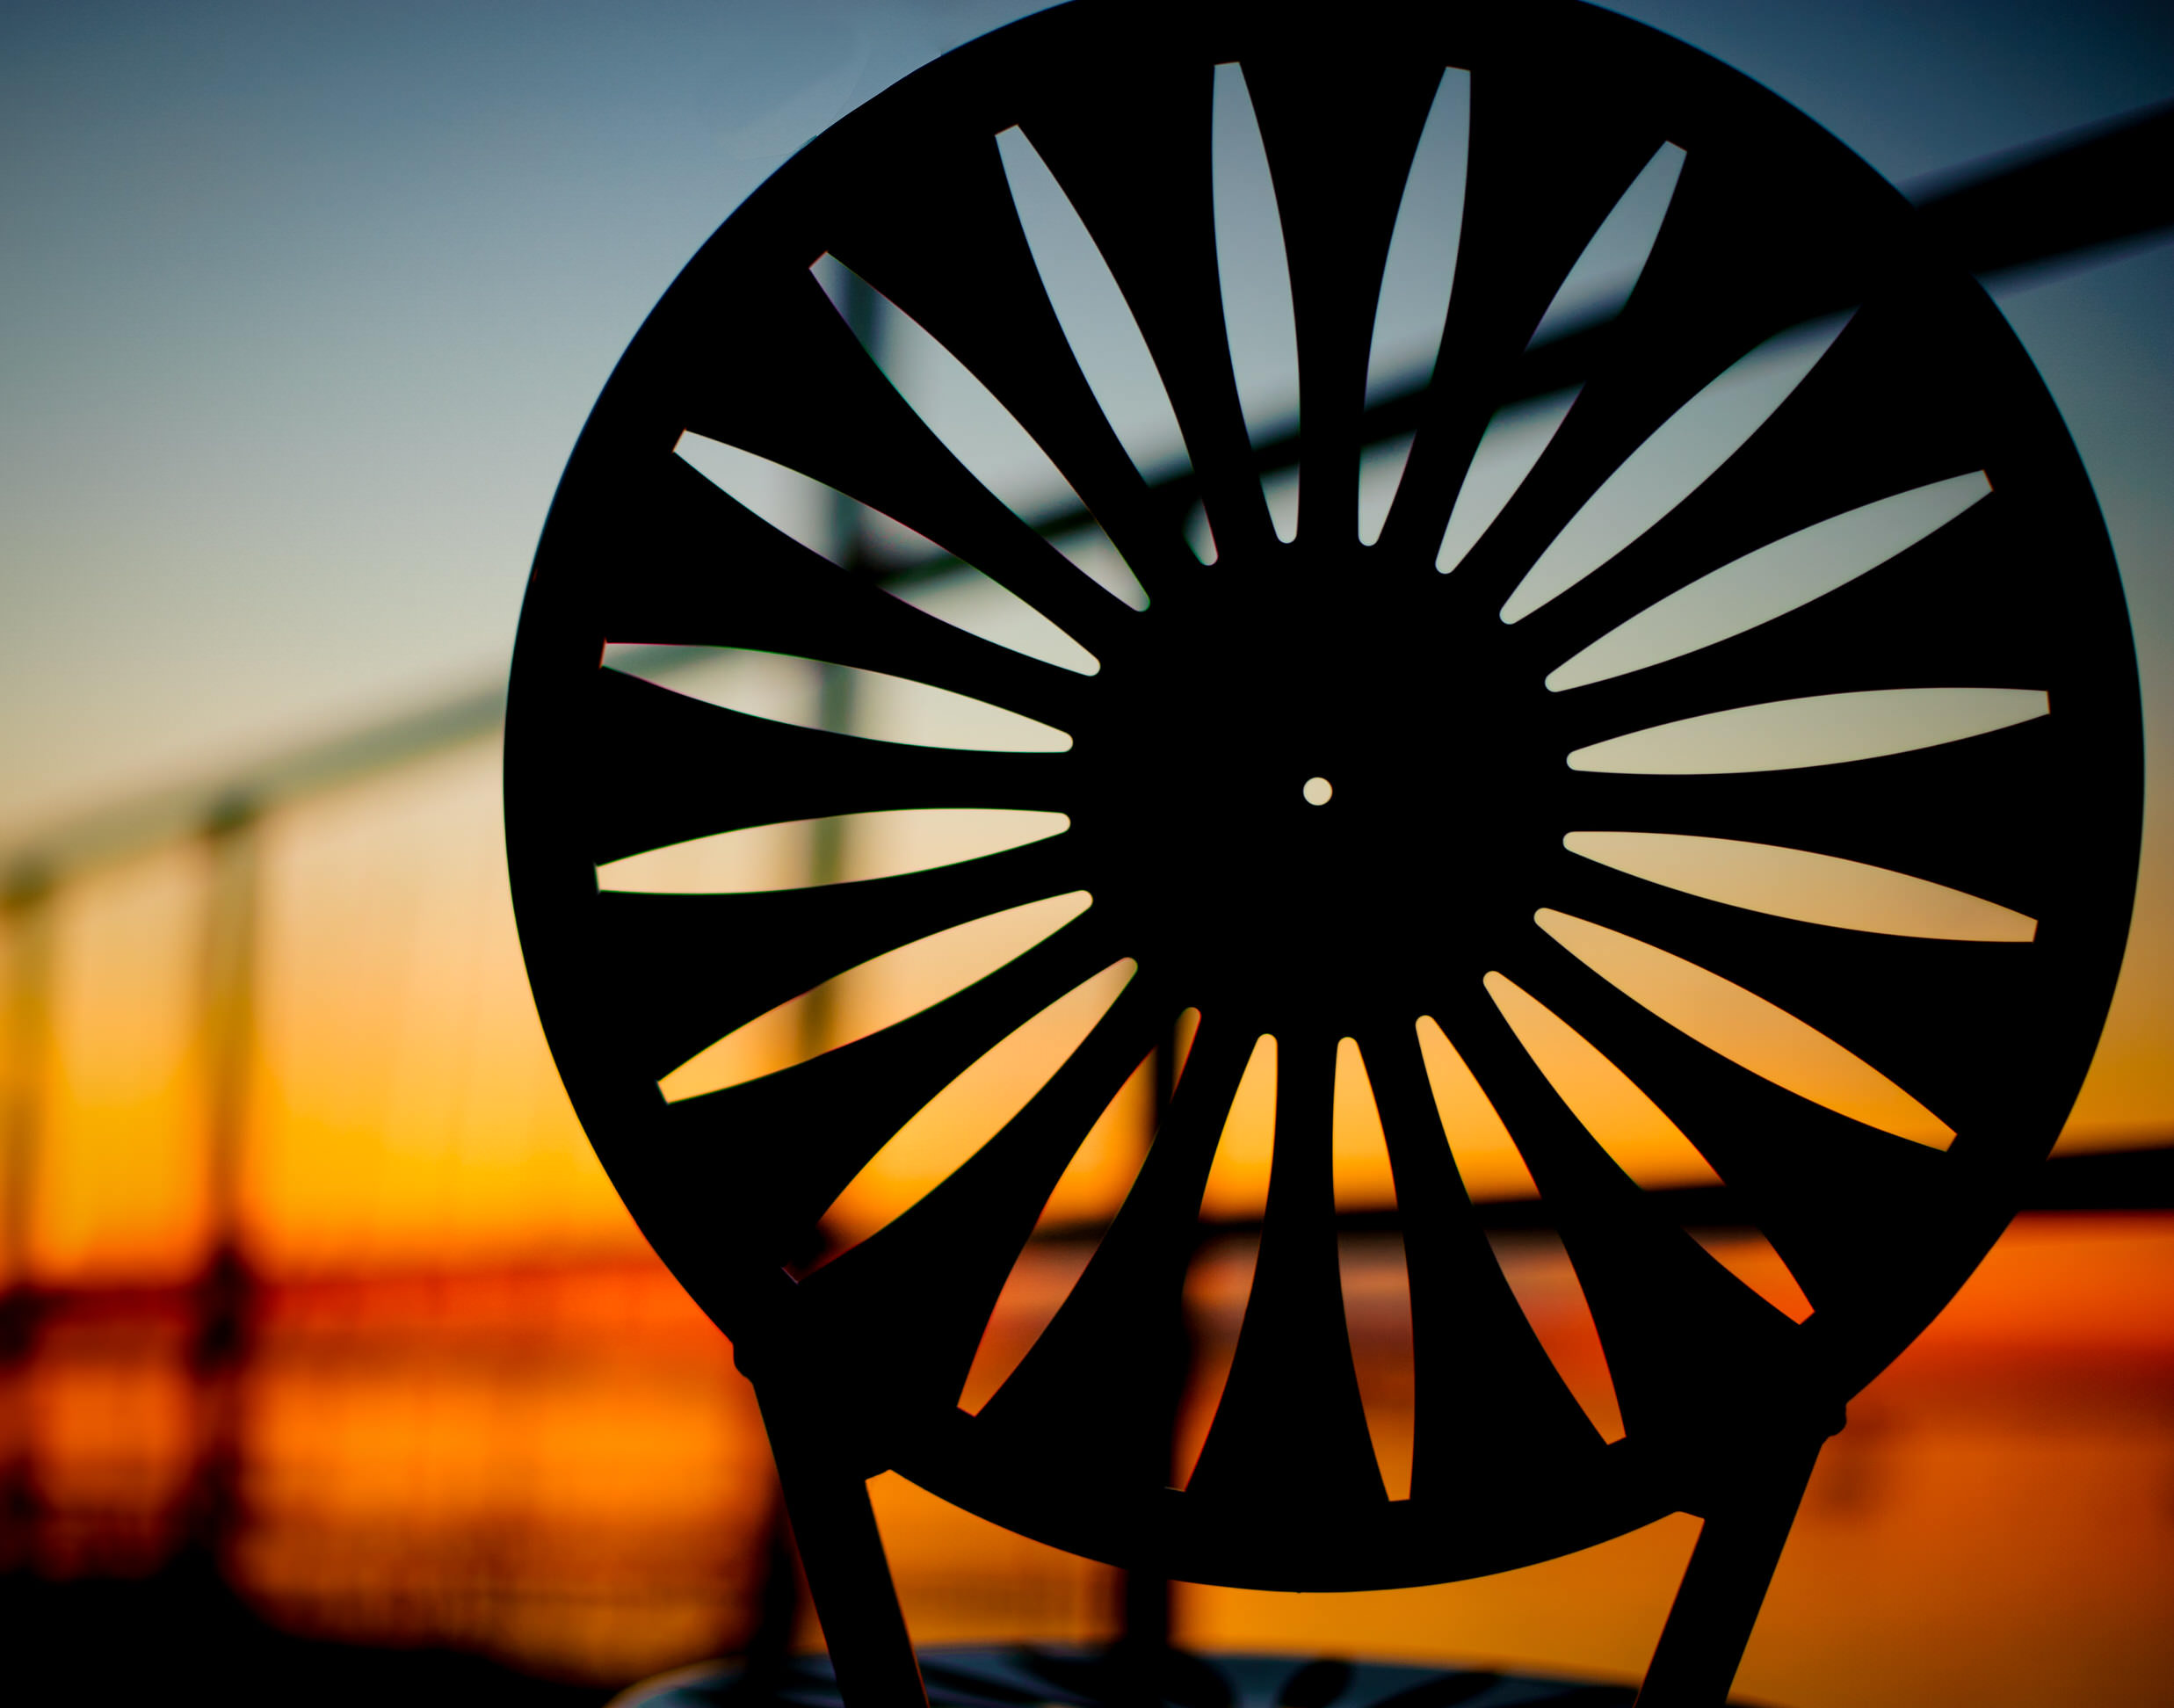 memorial union terrace chair at sunset